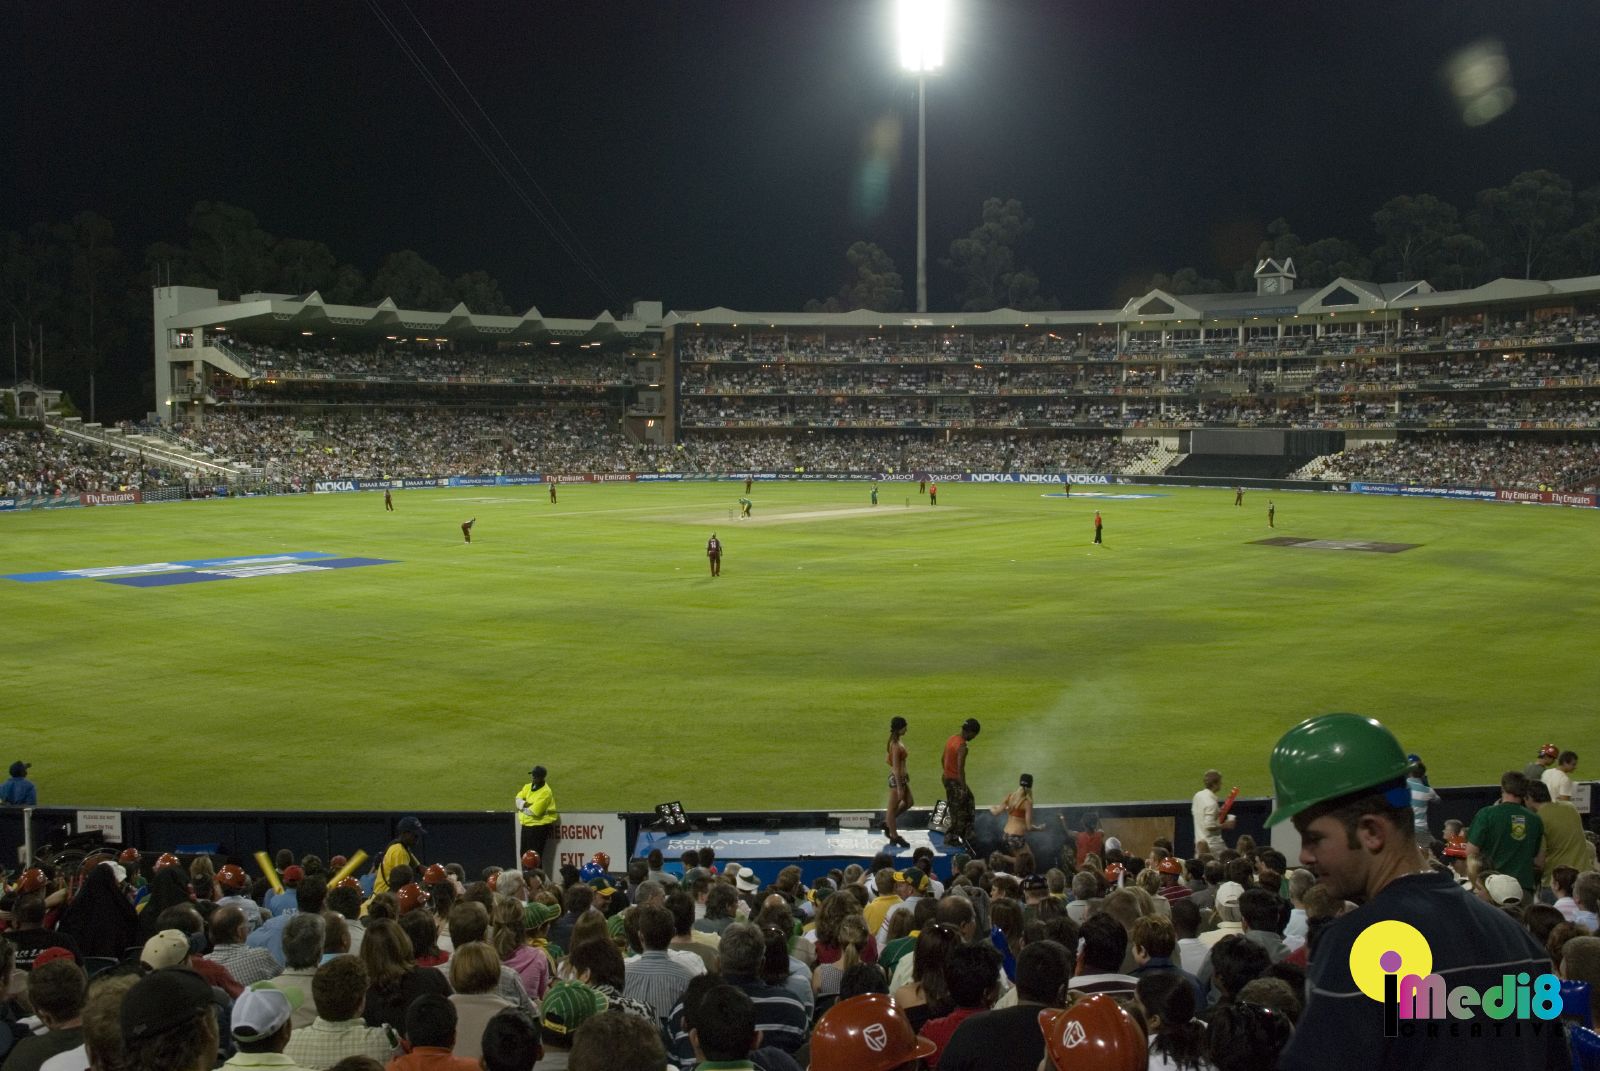 The Wanderers cricket ground guide